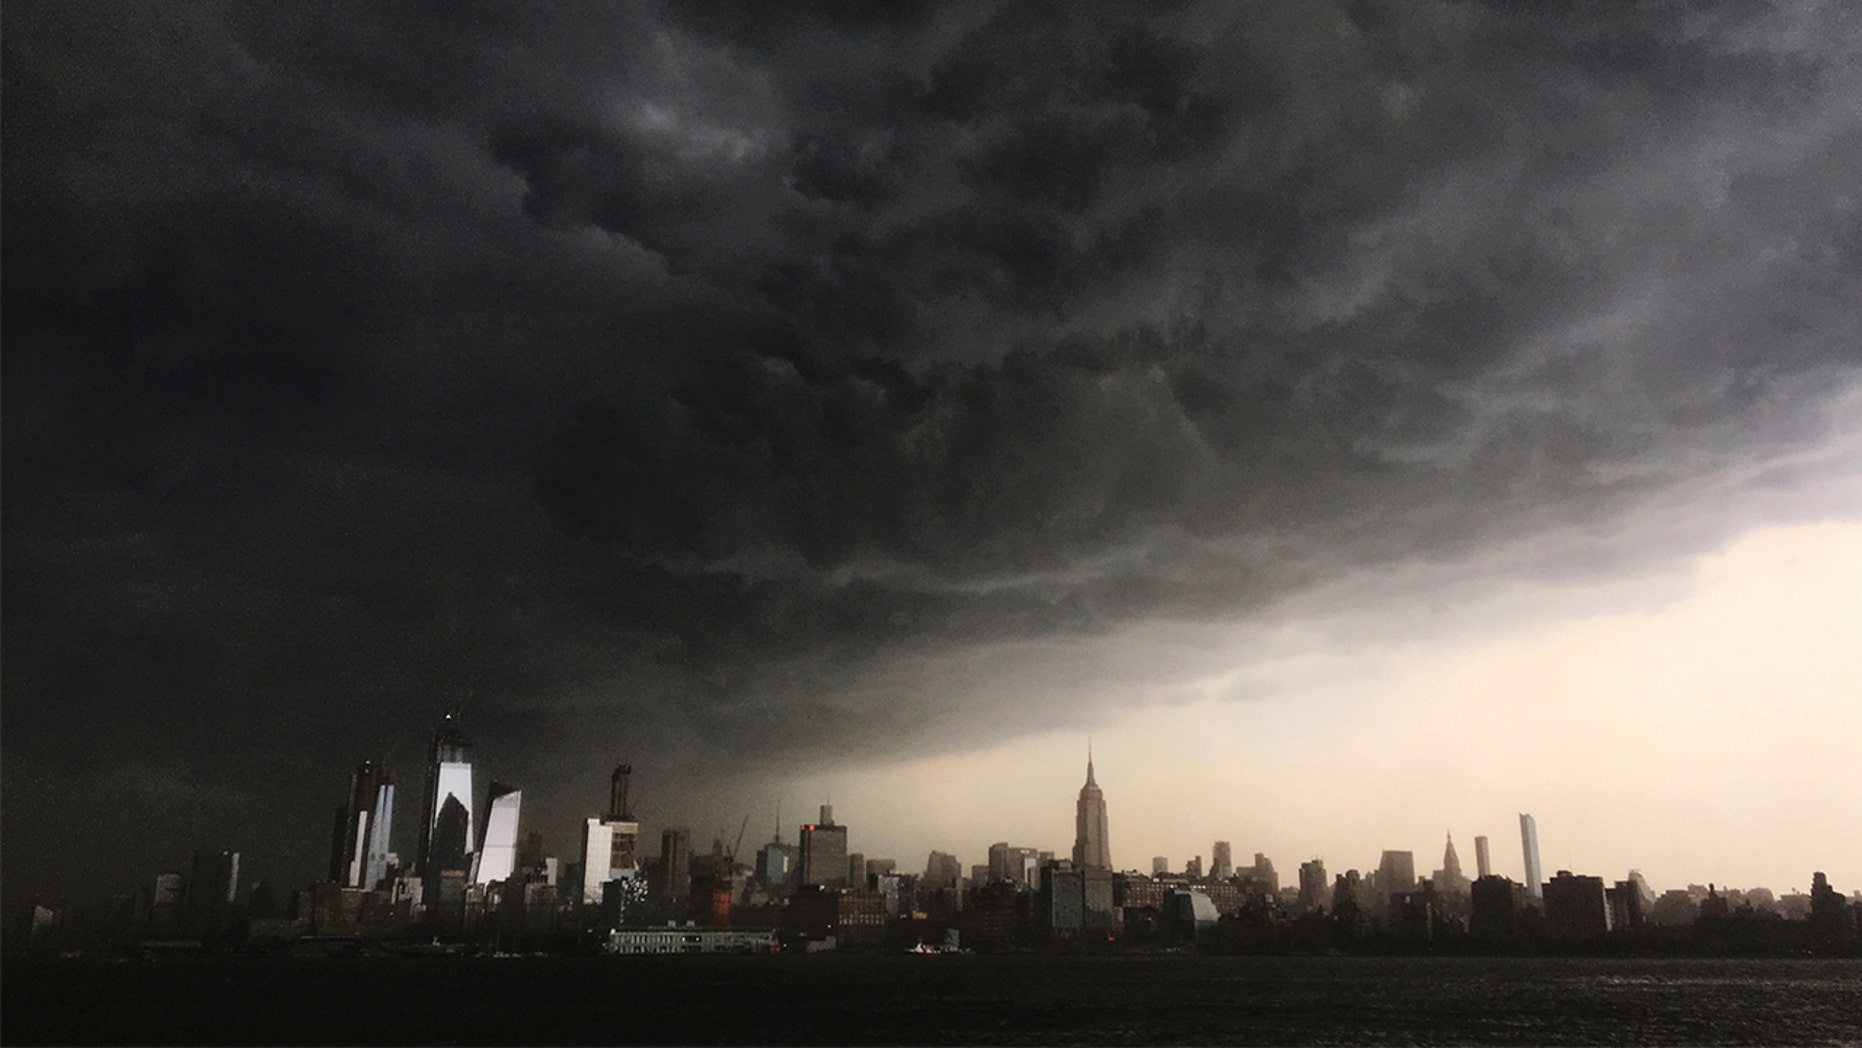 Three tornadoes hit NY amid powerful Northeast storms on Tuesday, NWS